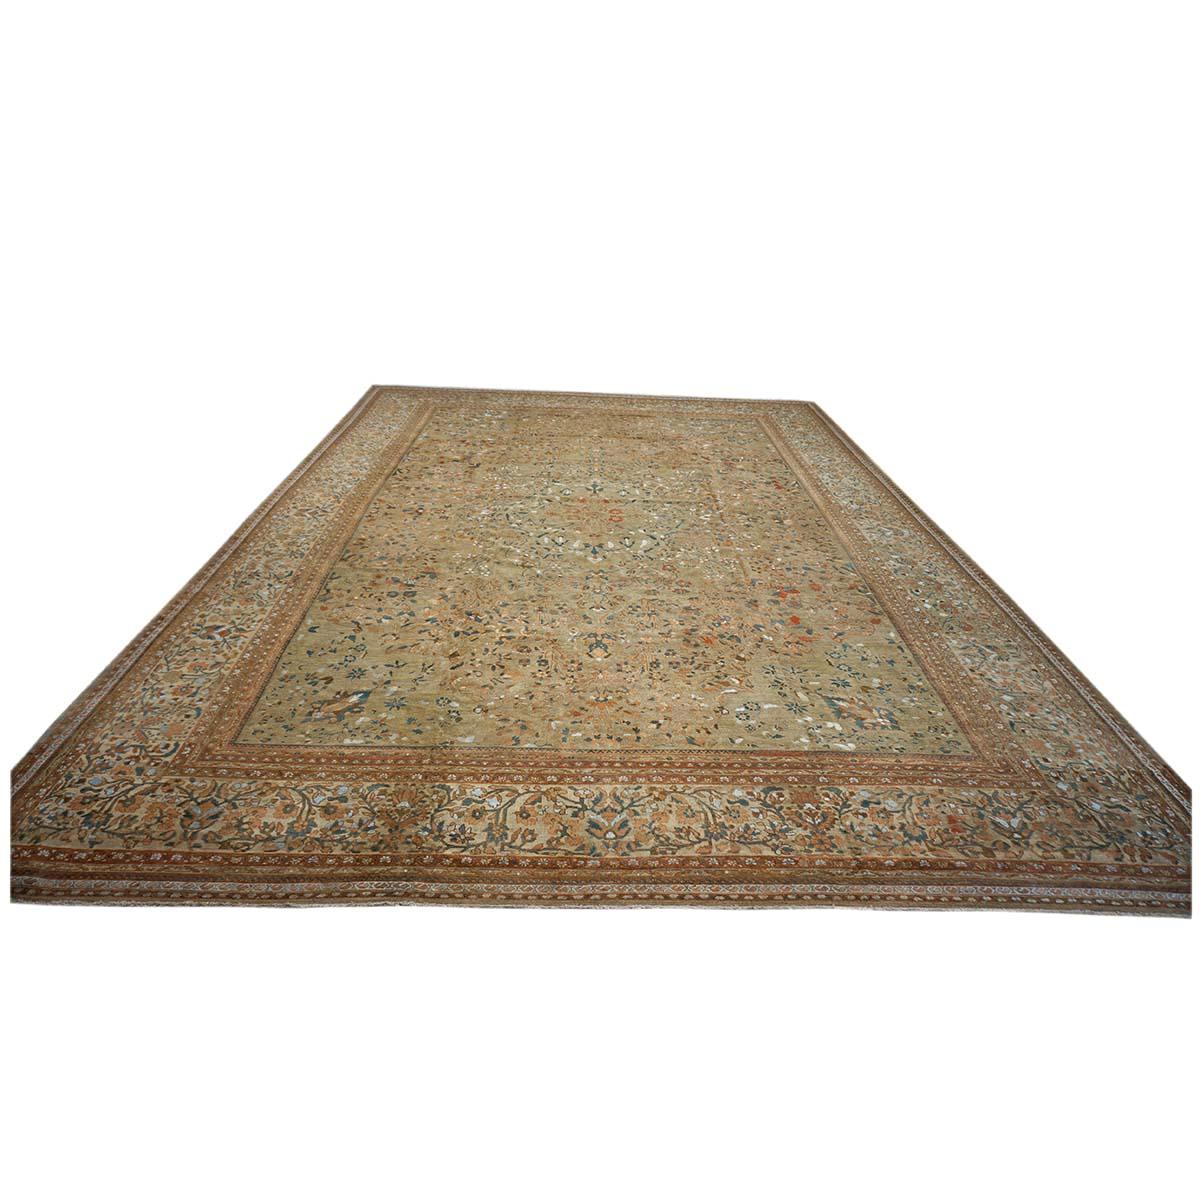 Late 19th Century 1870s Antique Persian Ziegler Sultanabad 15x21 Tan, Rust, & Light Blue Area Rug For Sale